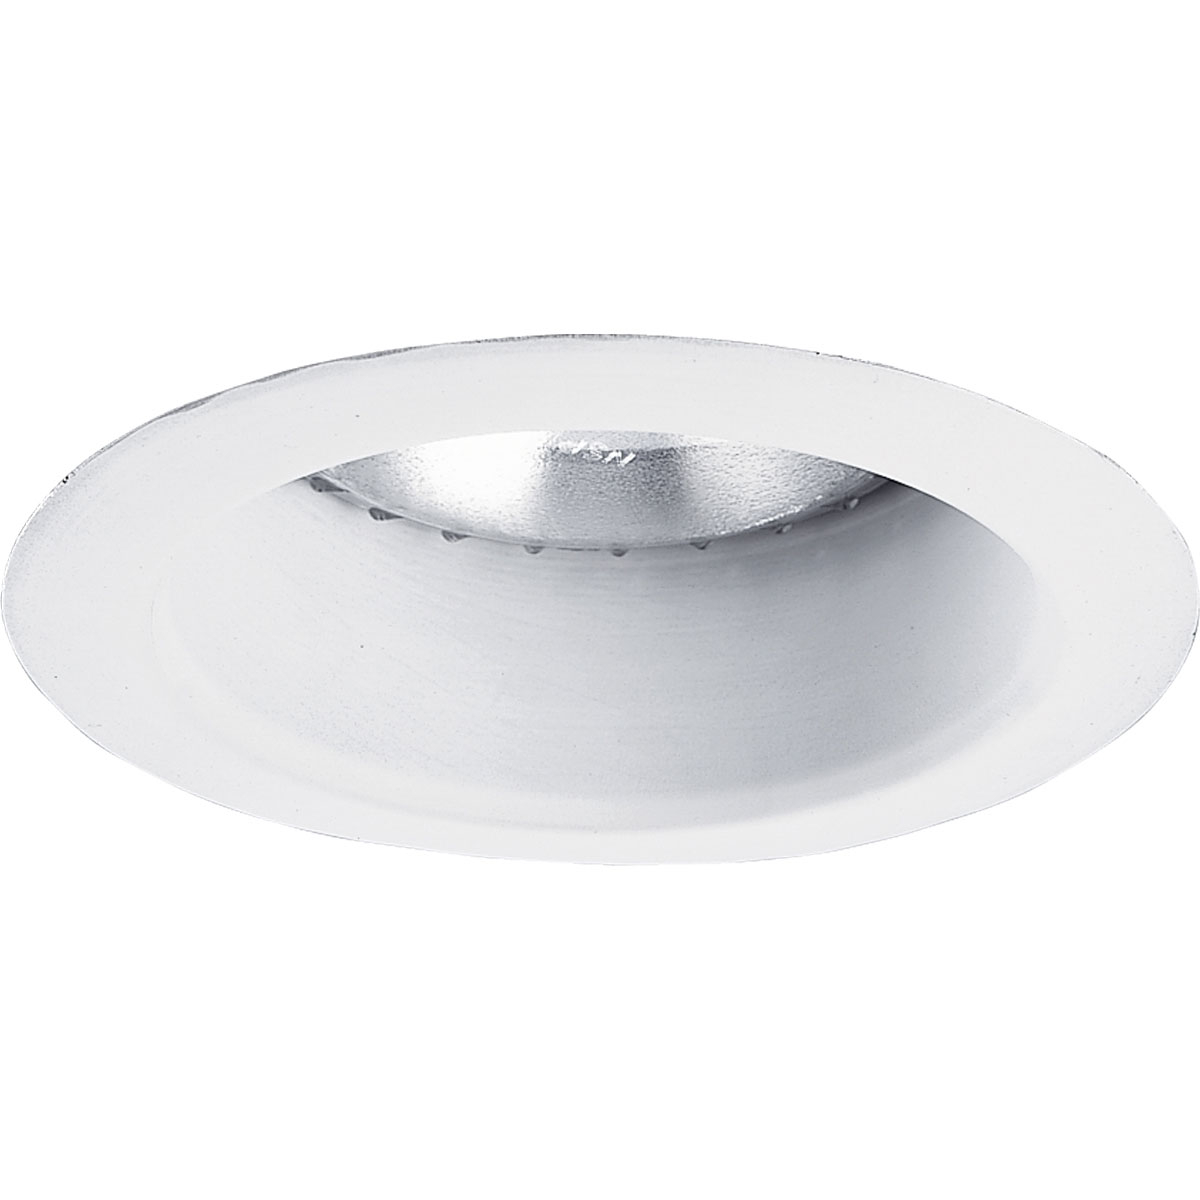 P8168-28 785247816835 5 in Deep Open Reflector in White finish and bright white powdered painted integral metal flange.